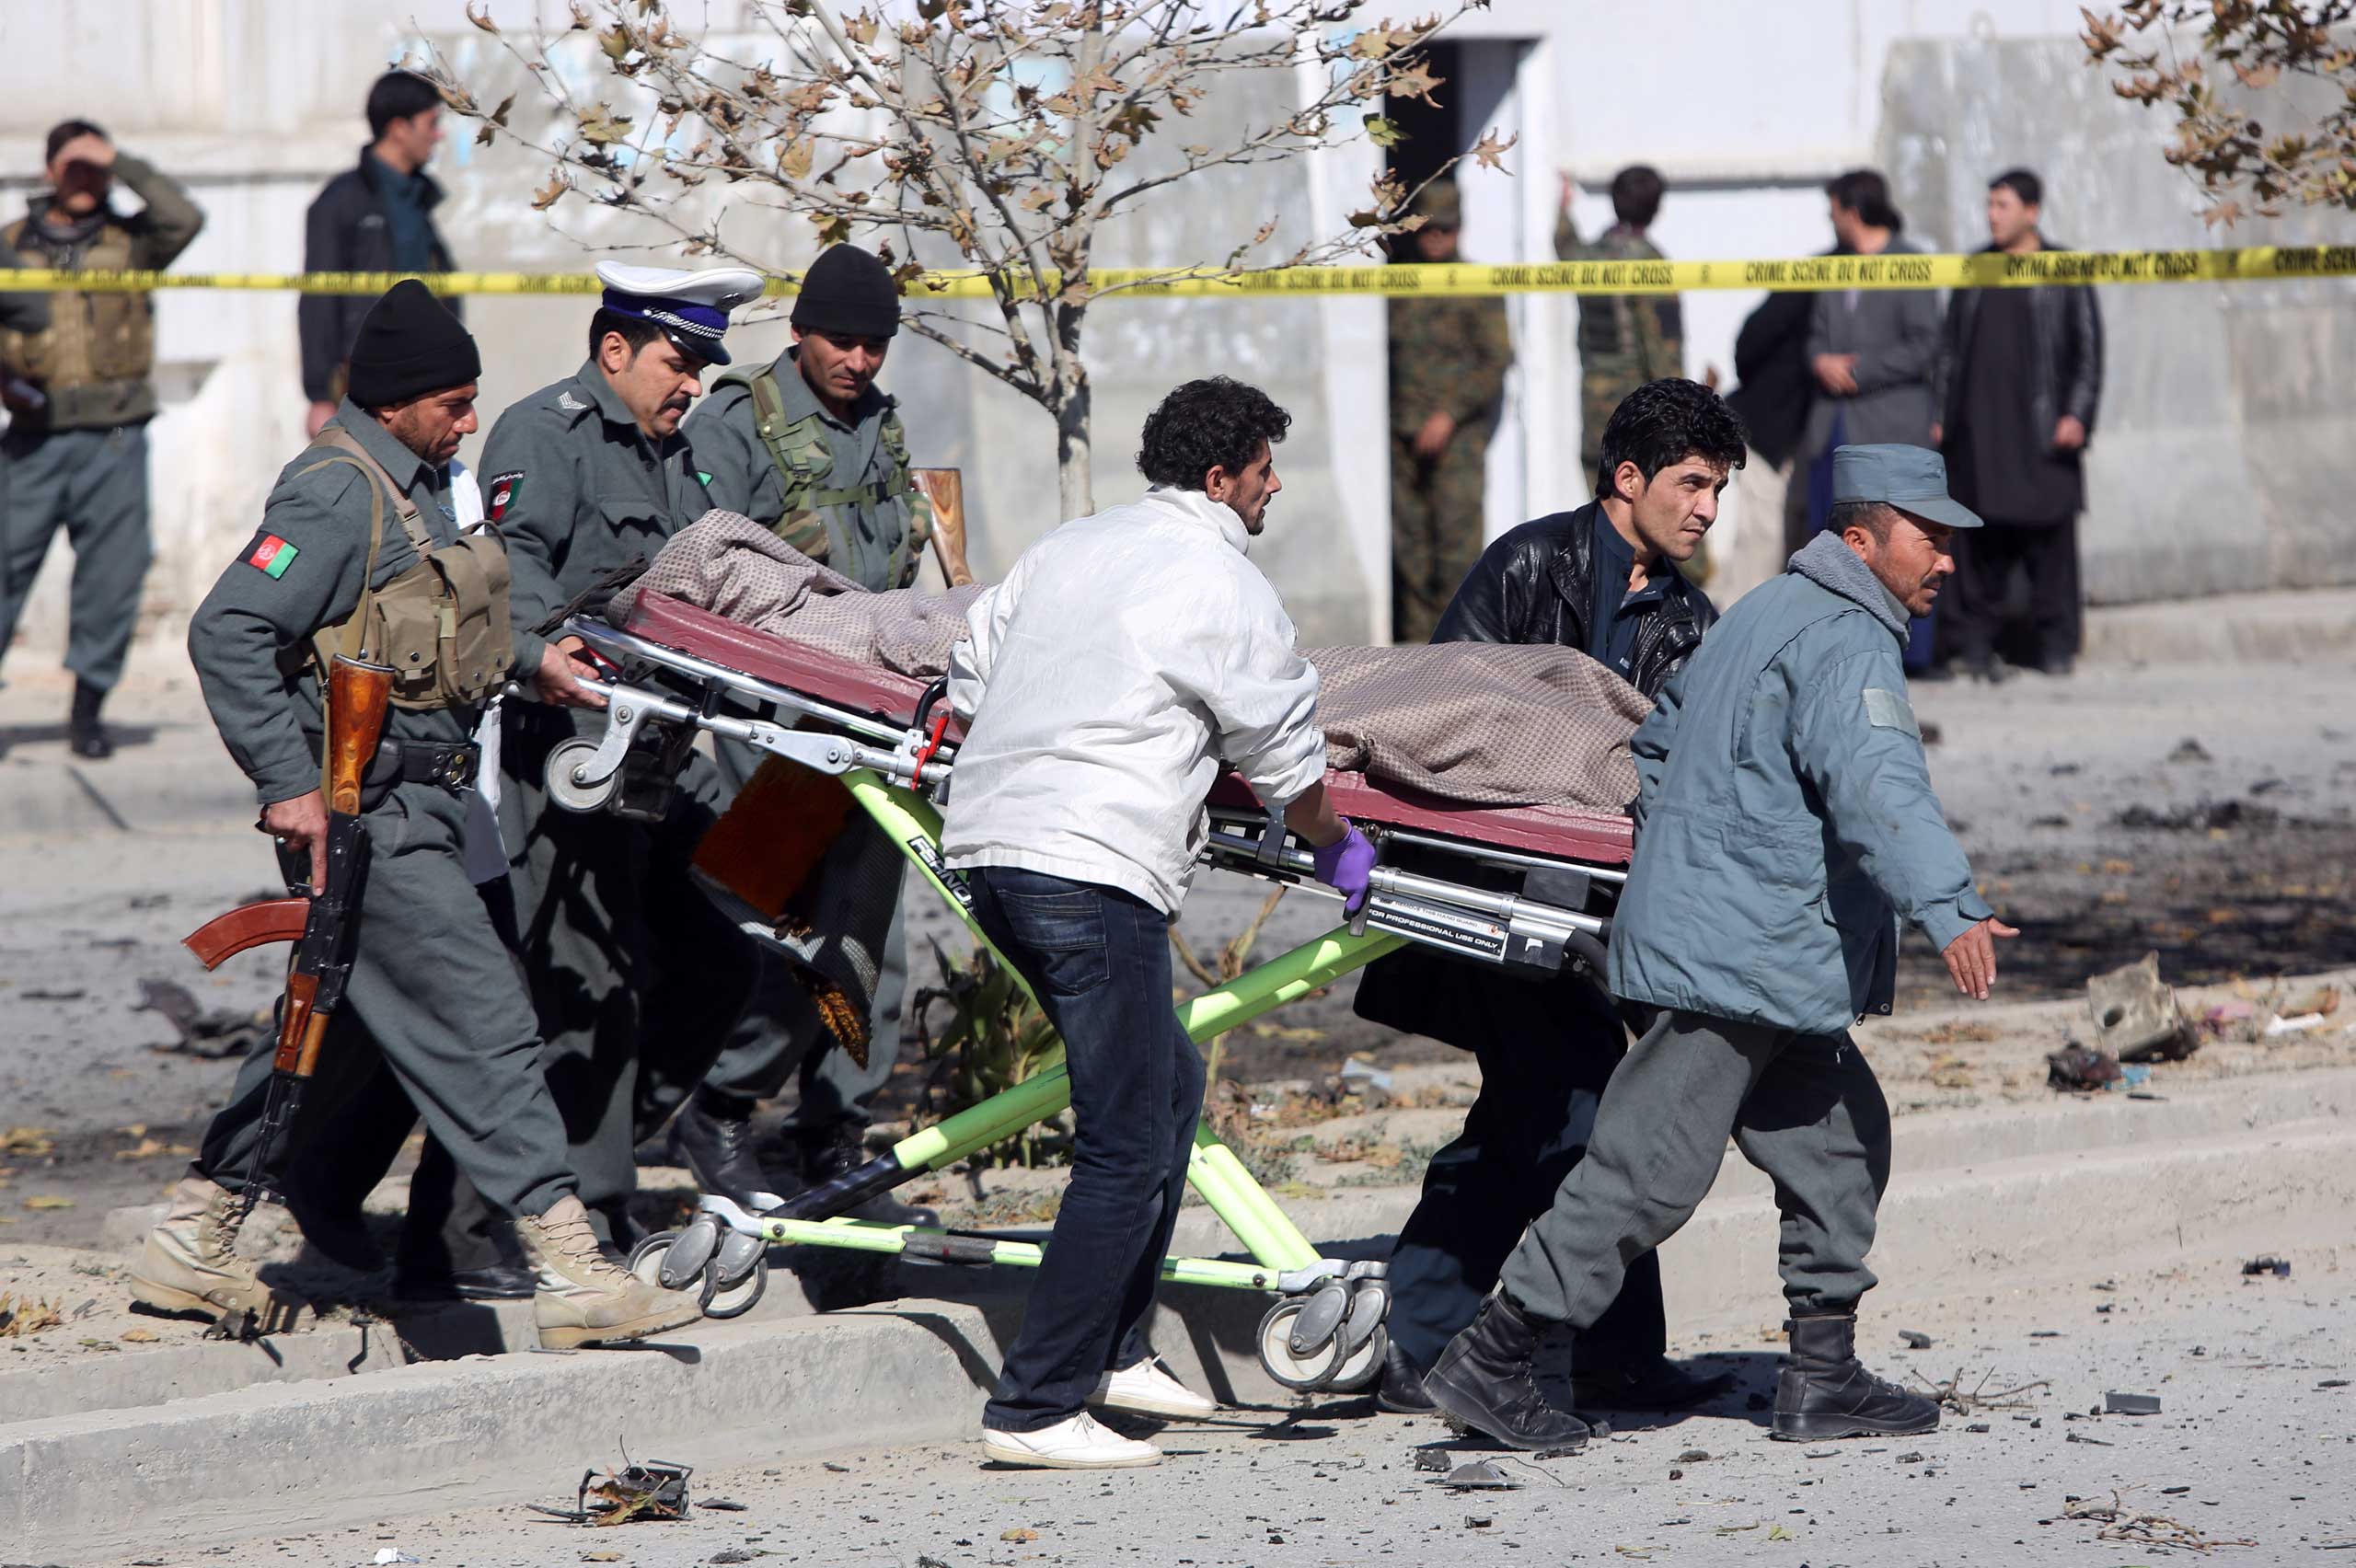 Afghan security forces carry the body of a civilian after a suicide attack in Kabul that targeted Shukria Barazkai, a prominent female member of Afghanistan's parliament, Nov. 16, 2014. (Rahmat Gul—AP)